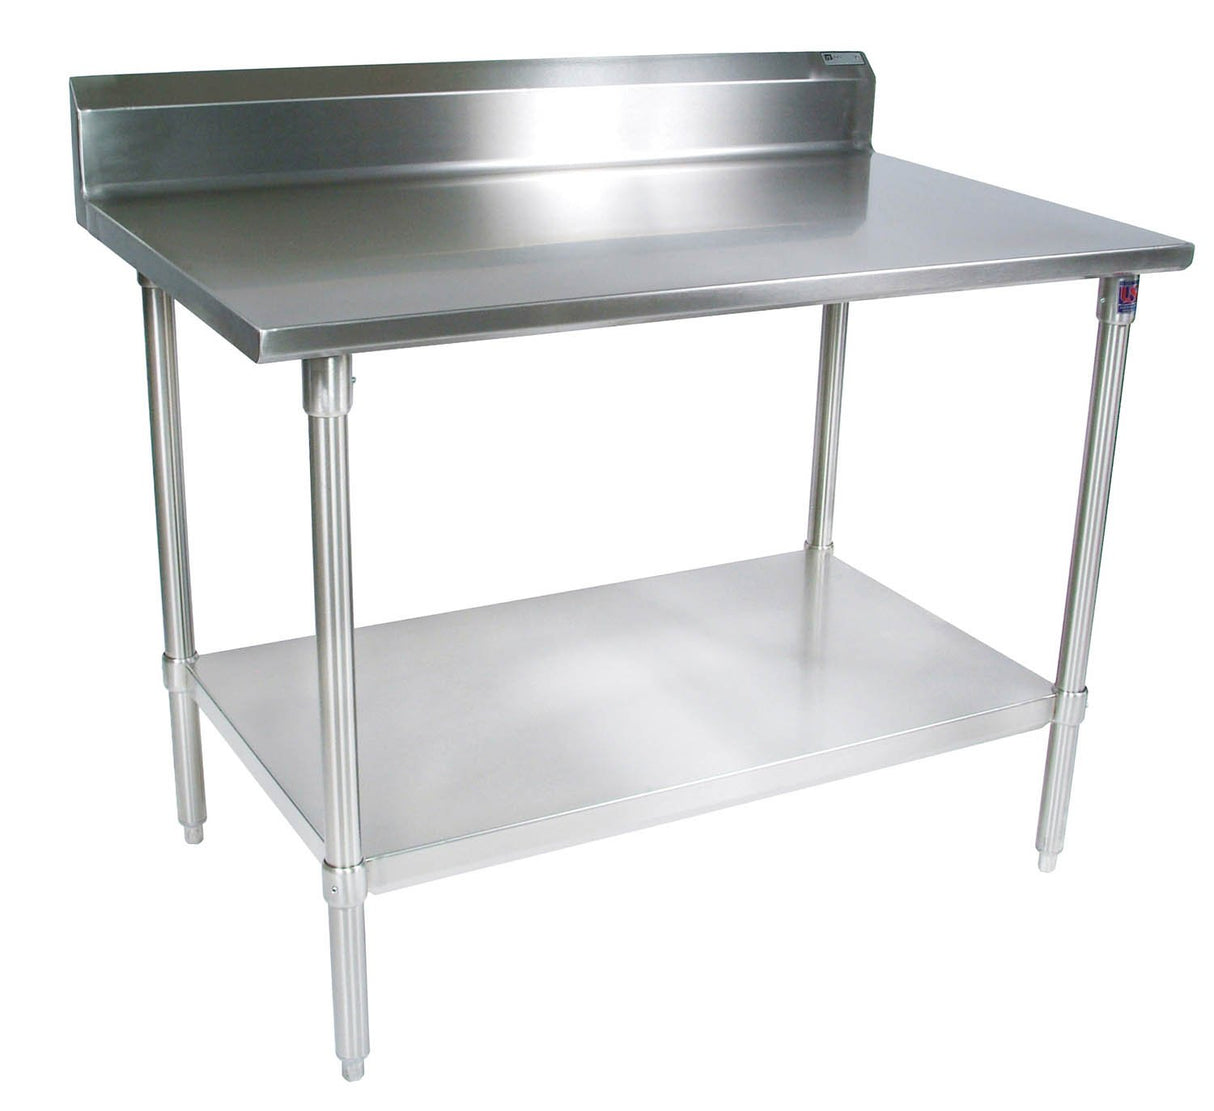 John Boos ST4R5-2436SSK 14 Gauge Stainless Steel Work Table with 5" Rear Riser, Base and Shelf, 36" x 24"